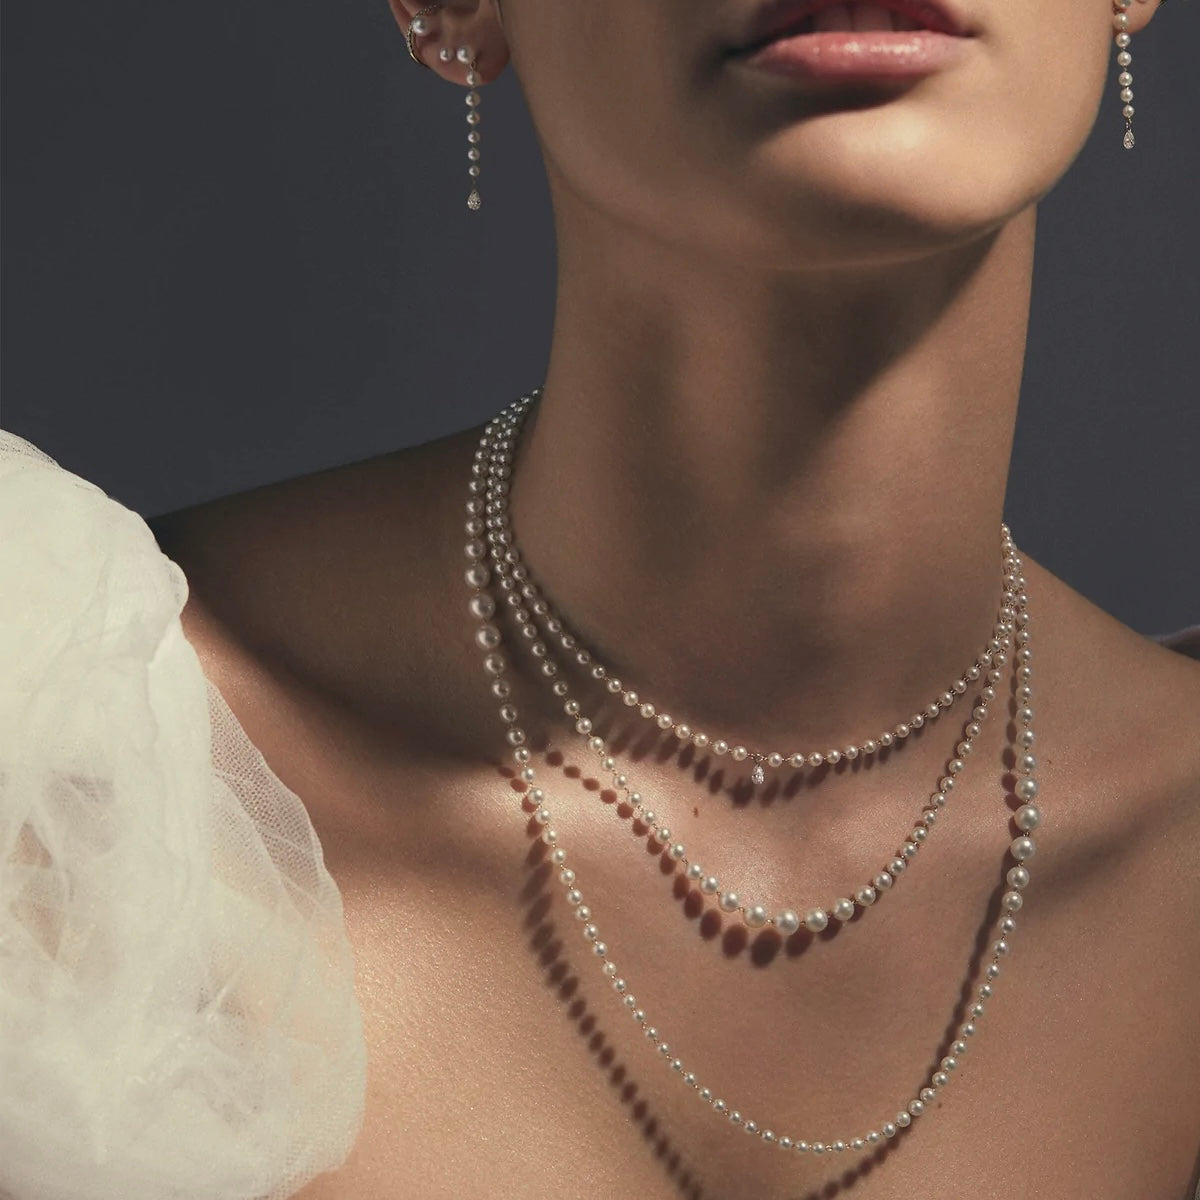 Symmetrical Cascading Pearl Necklace